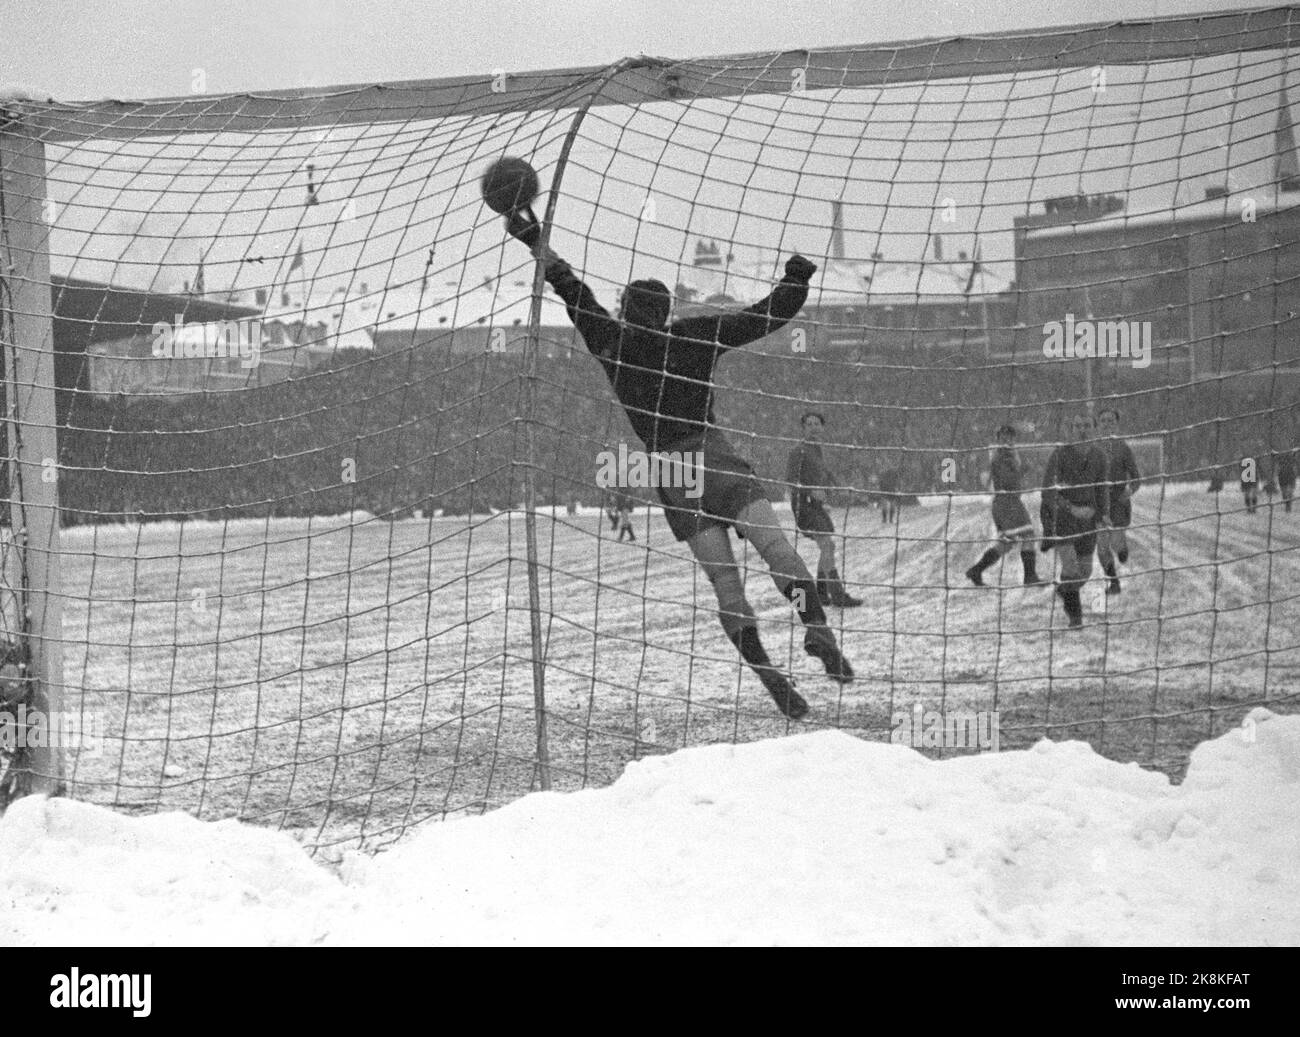 Oslo 19471115. Football in snowy weather at Bislett. The football match between Dynamo and Skeid was played on winter. Before and during the match it snowed tightly, and the grass mat was white and hard. 32,000 spectators are a record at Bislett. Here it is 'Skeids' keeper Knut Arnevaag who takes a great rescue. Photo: Current / NTB Stock Photo